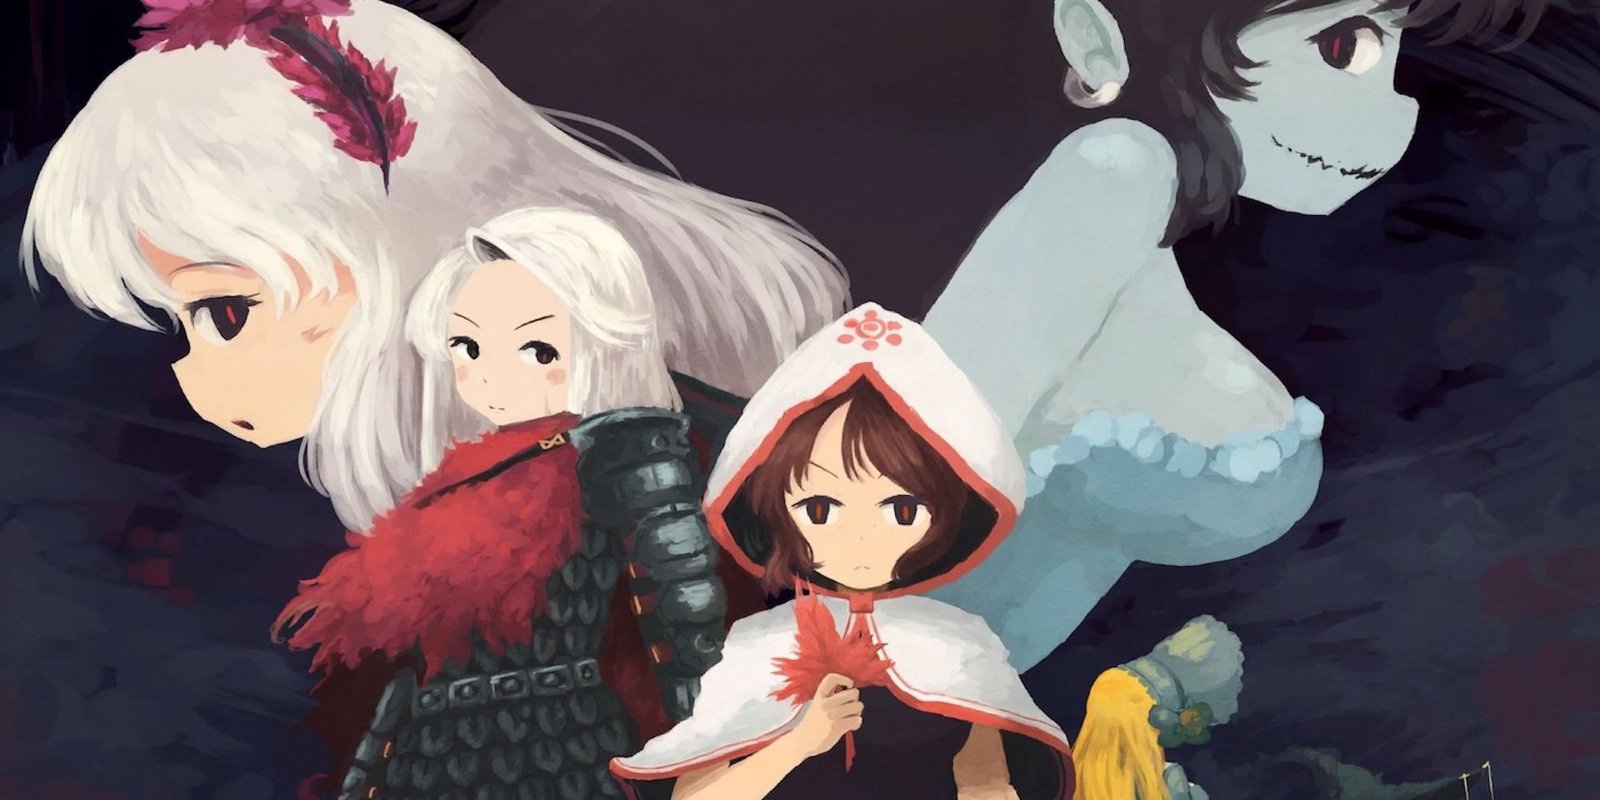 Promo art featuring characters from Momodora: Reverie Under The Moonlight